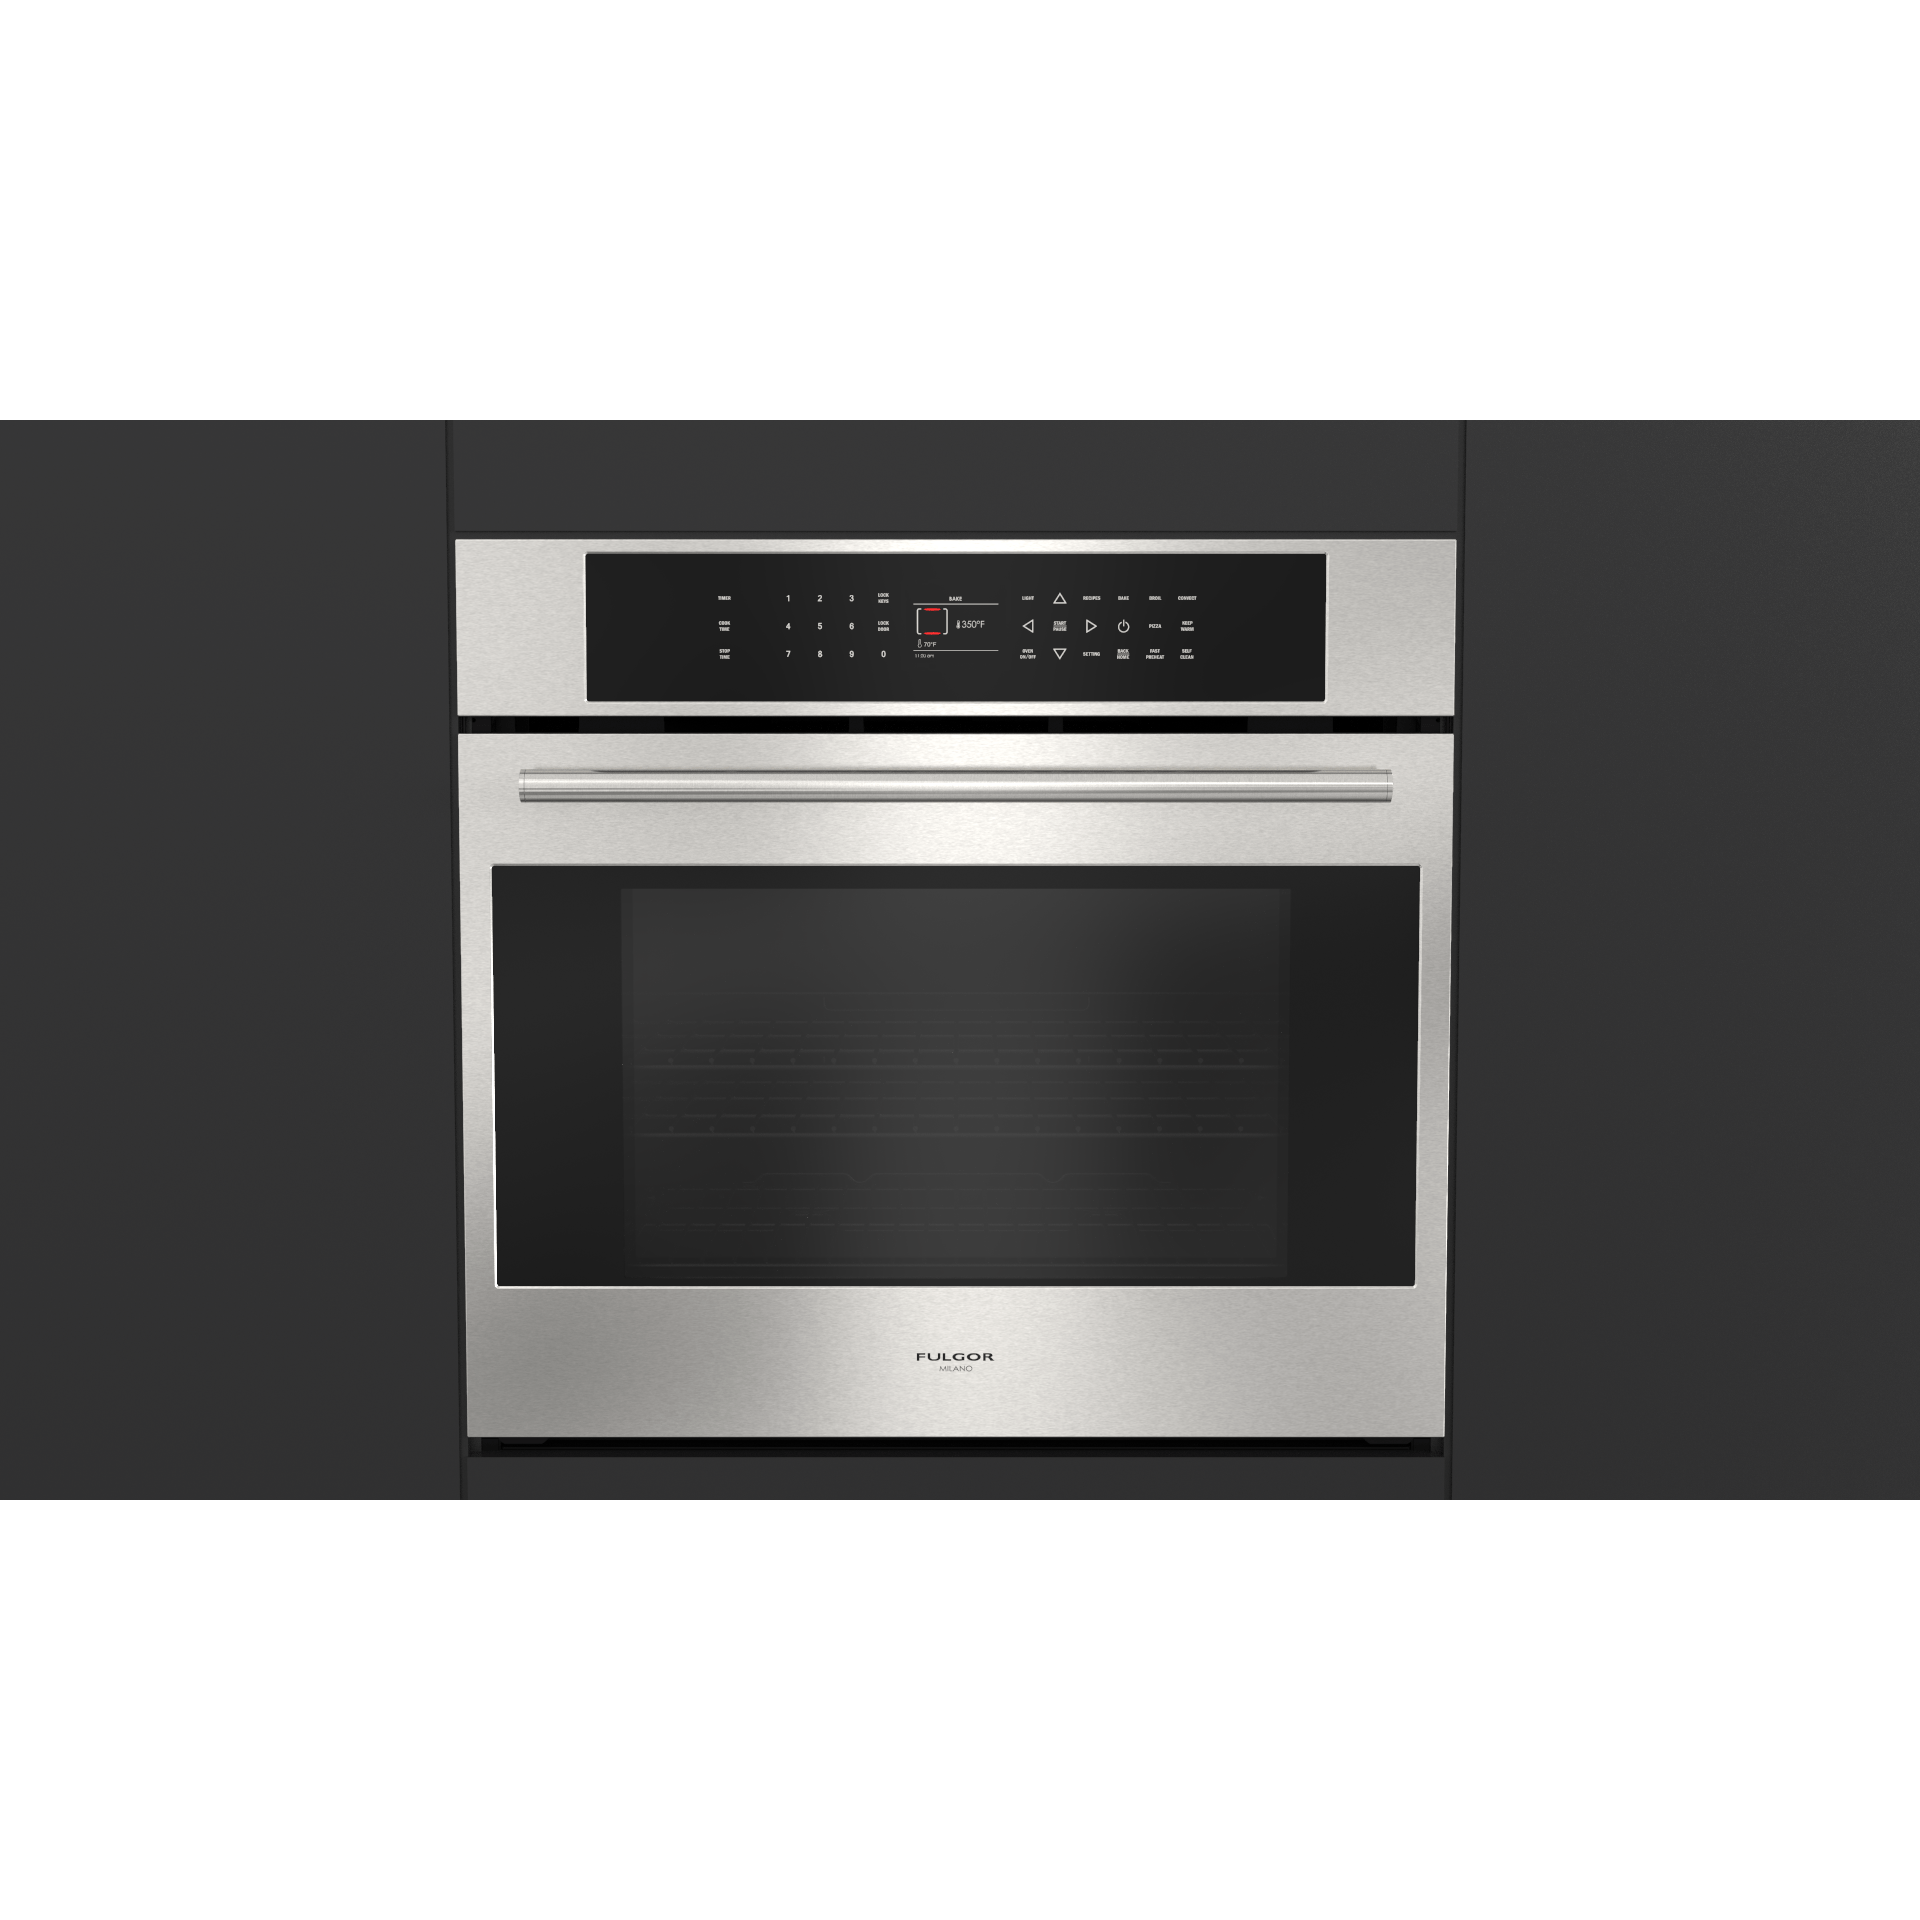 Fulgor Milano Package 30" Electric Wall Oven, 36" French Door Refrigerator, 30" Induction Cooktop, 30" Wall Mount Range Hood and 24" Built-In Dishwasher Wall Oven F7SP30S1F6FBM36S2 Luxury Appliances Direct